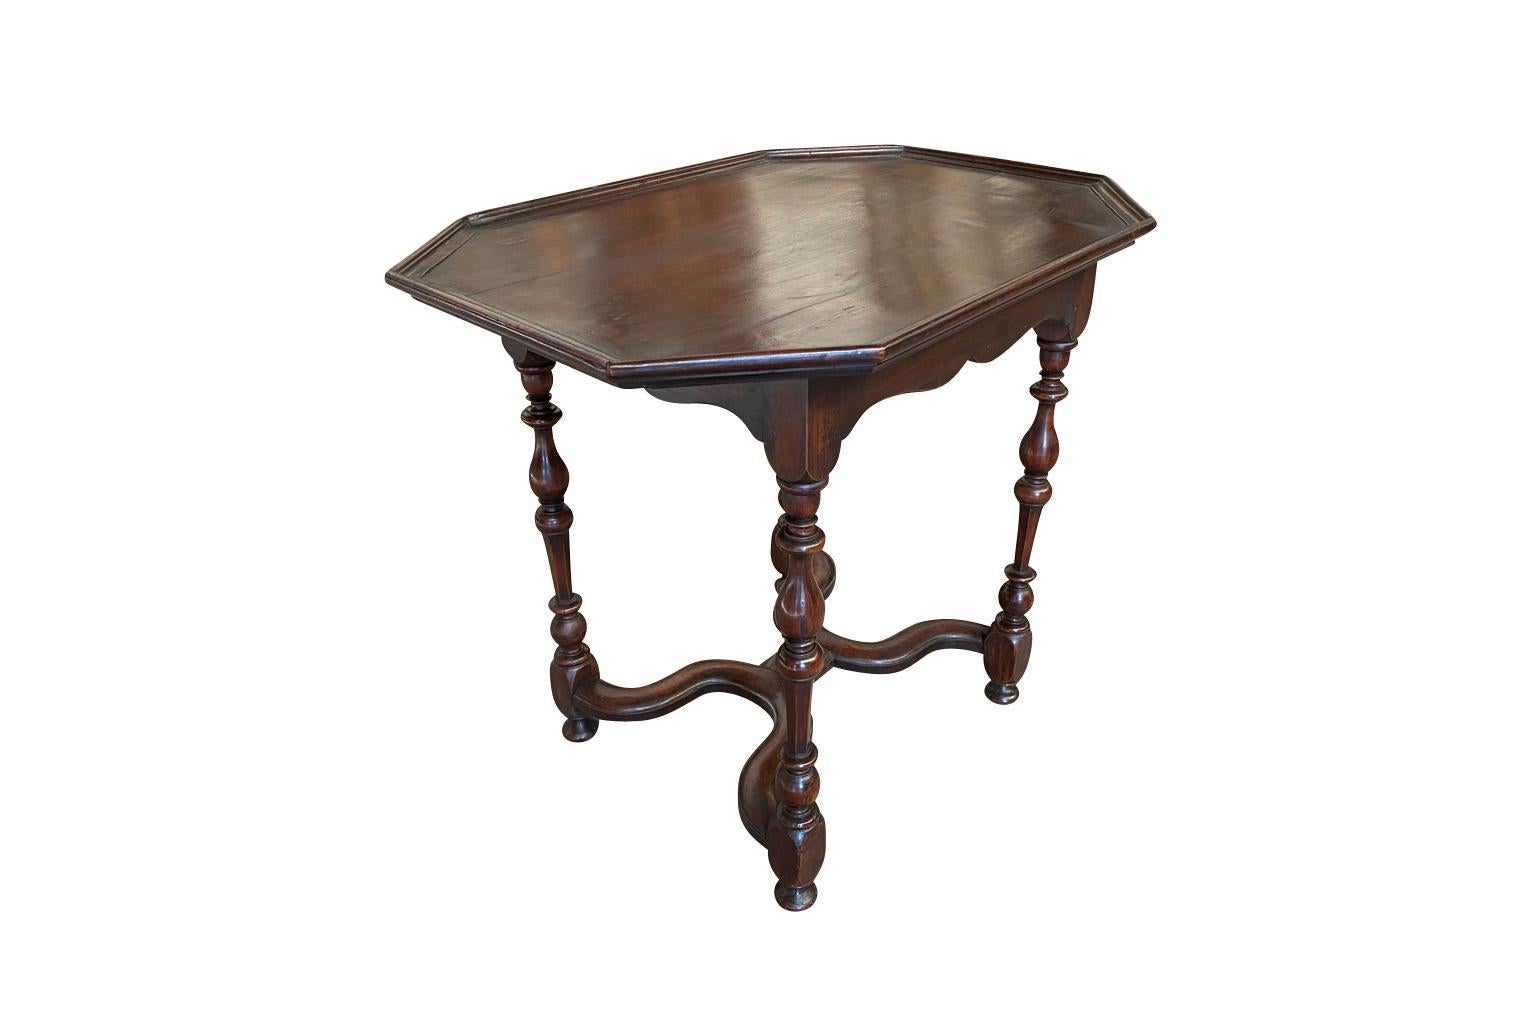 A very lovely French mid-19th century Louis XIII style side table beautifully constructed from walnut with a nice raised edge finish, single drawer and handsome turned legs.